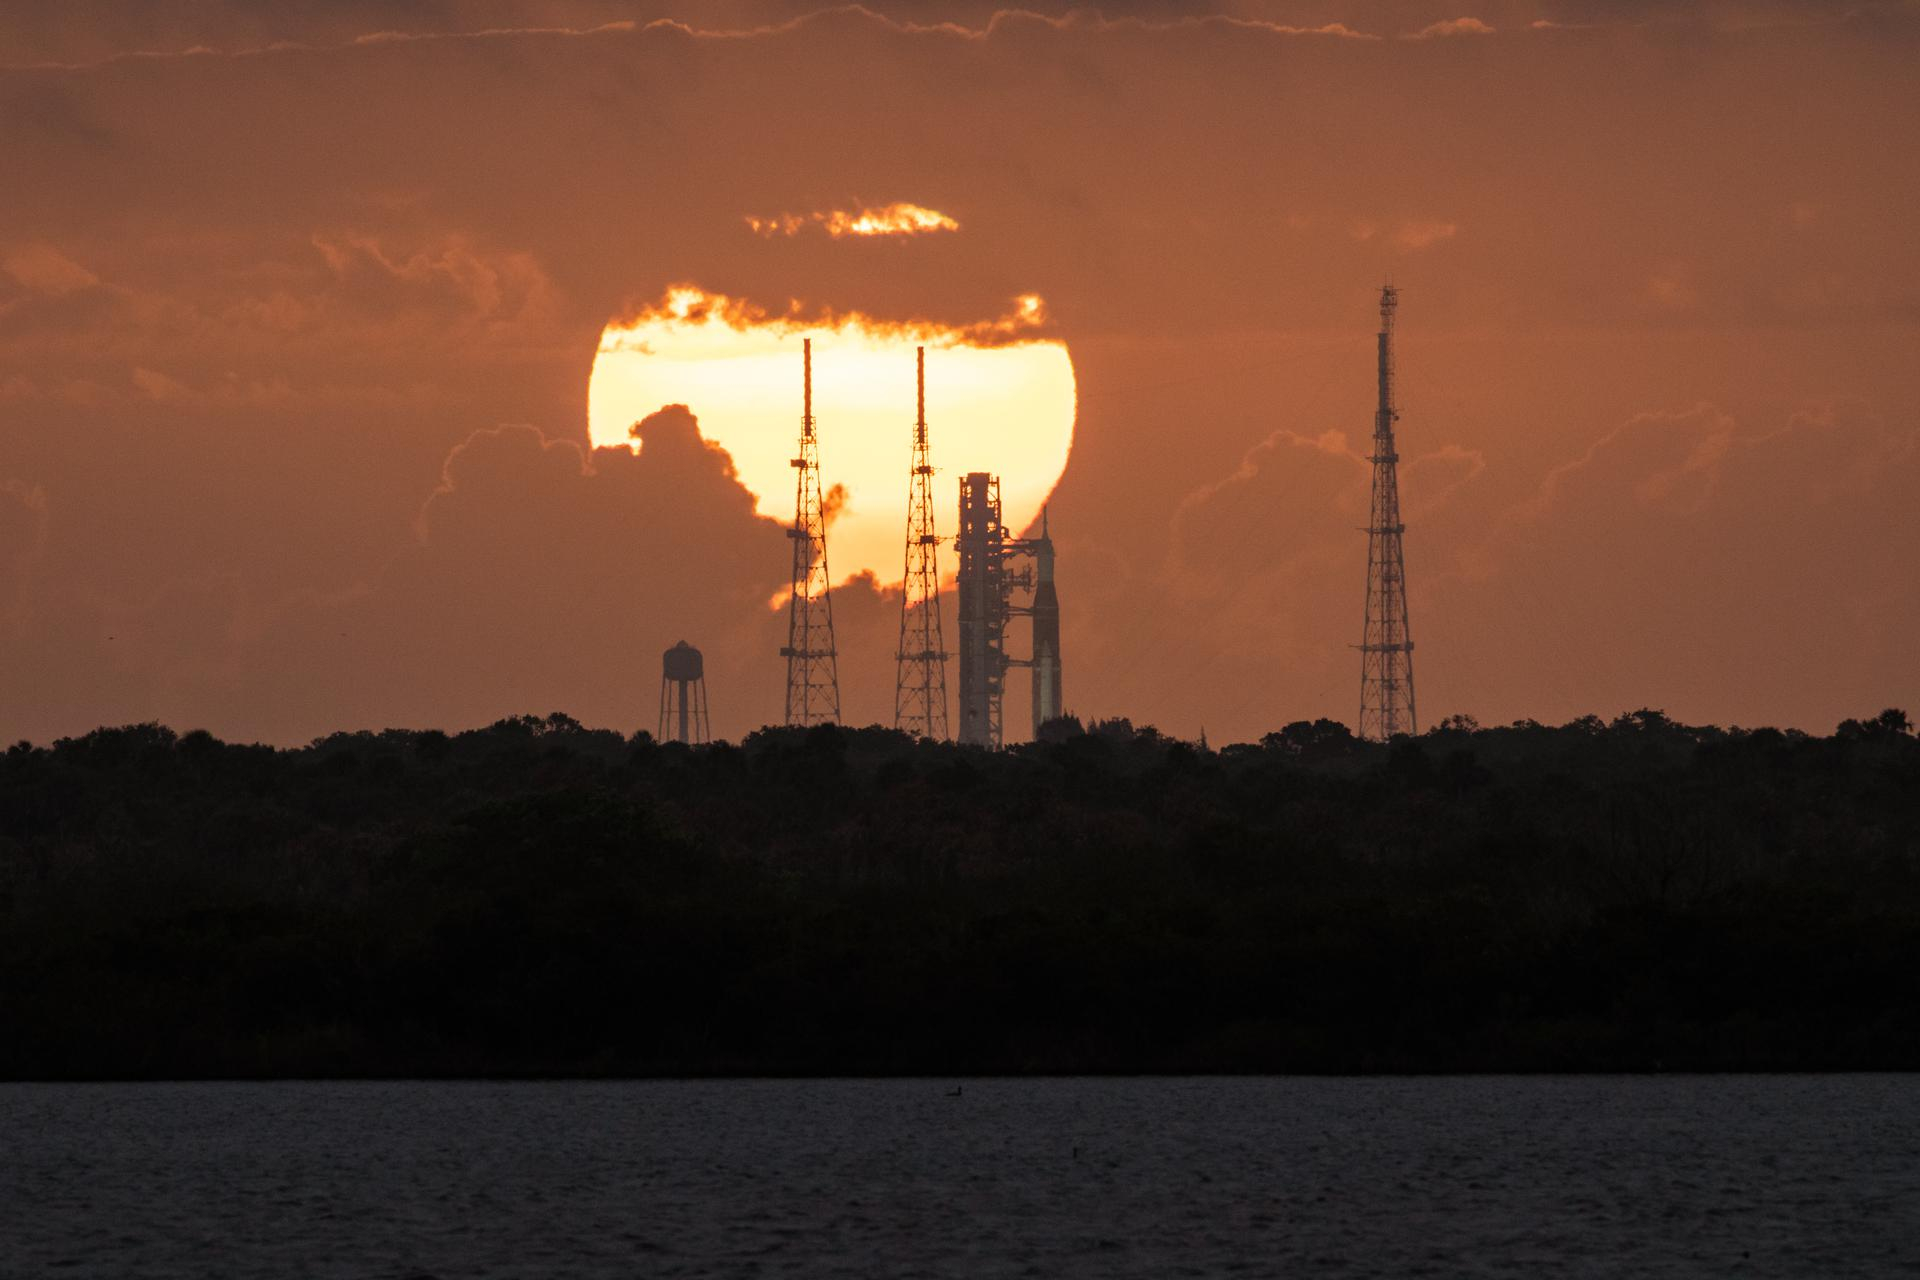 The sun rises behind NASA's Artemis 1 moon rocket at Pad 39B of the Kennedy Space Center in Cape Canaveral, Florida.